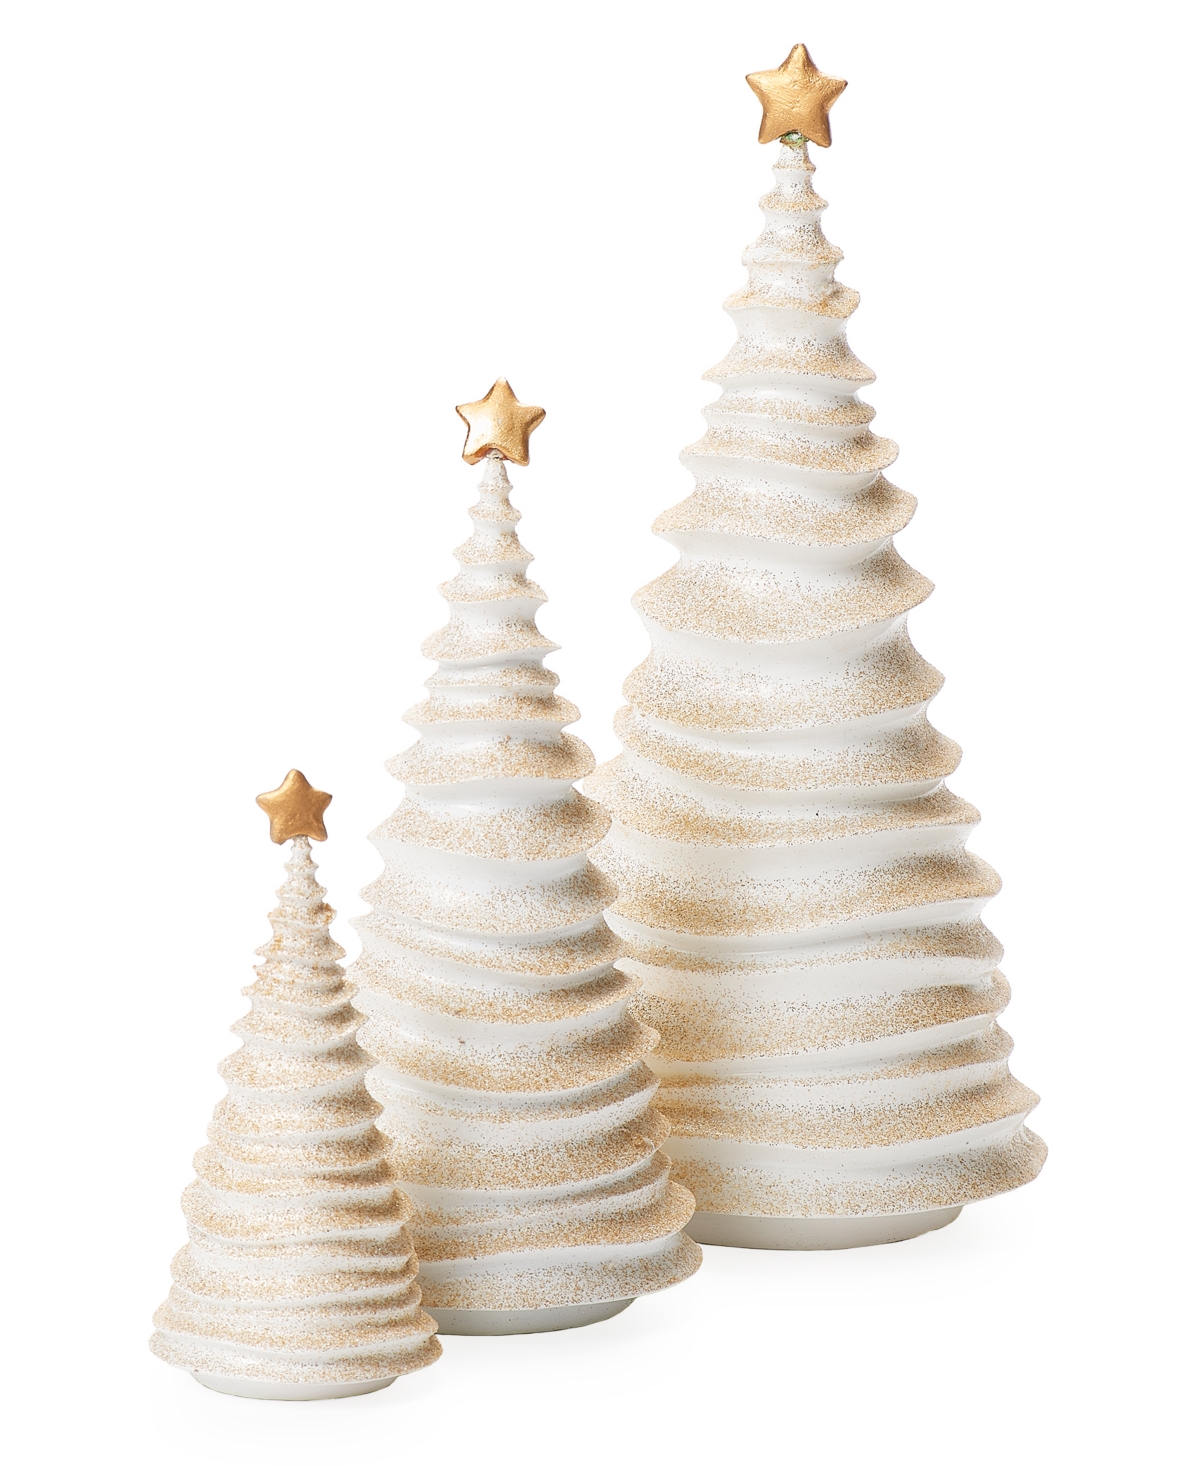 6-13.5" H 3 Piece Set Frosting Trees - Multi Color